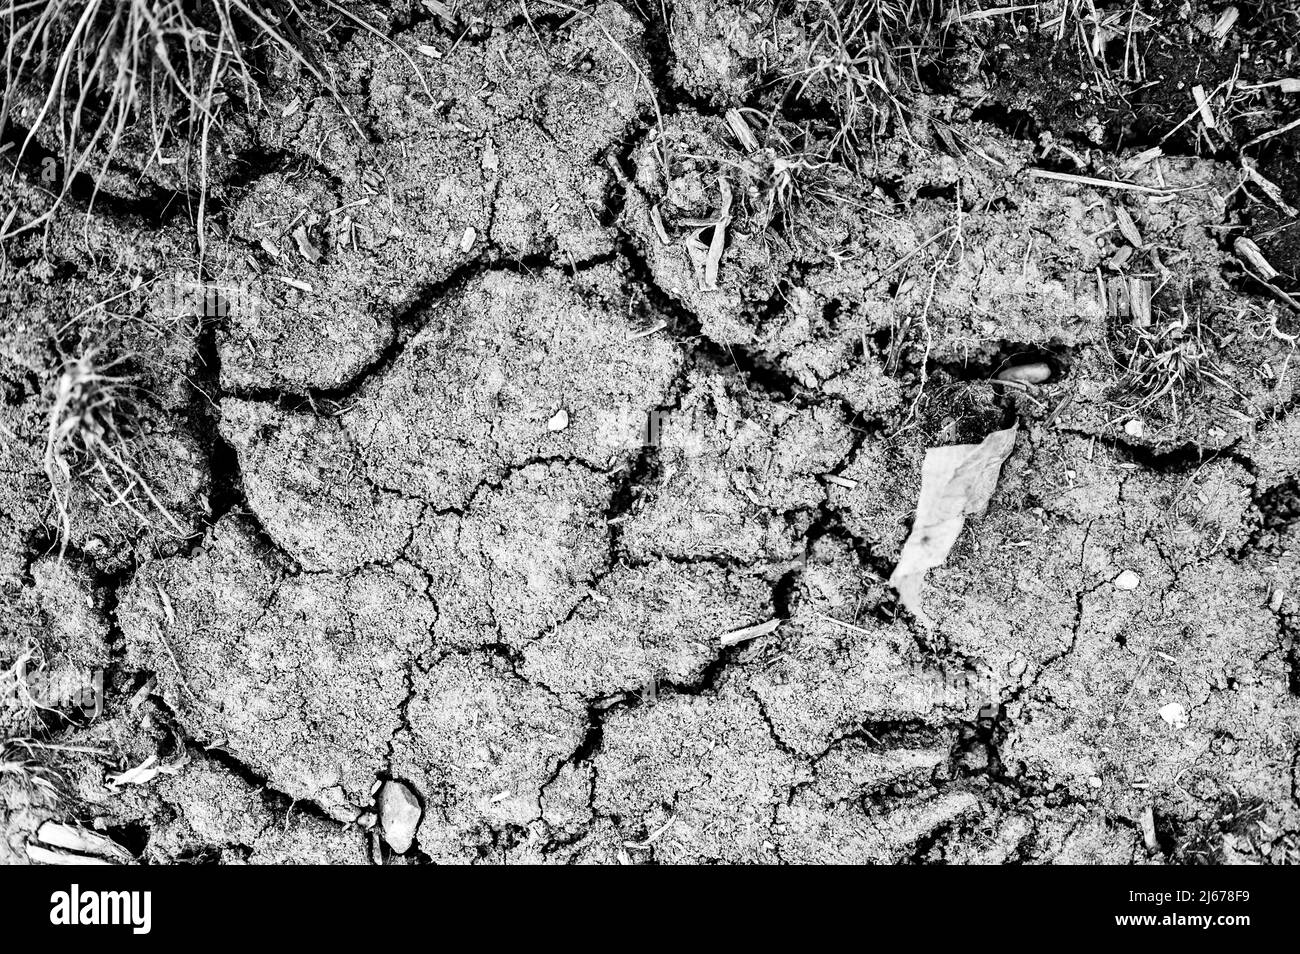 cracked and dry top soil in a agricultural corn field experiencing a drought.  Stock Photo